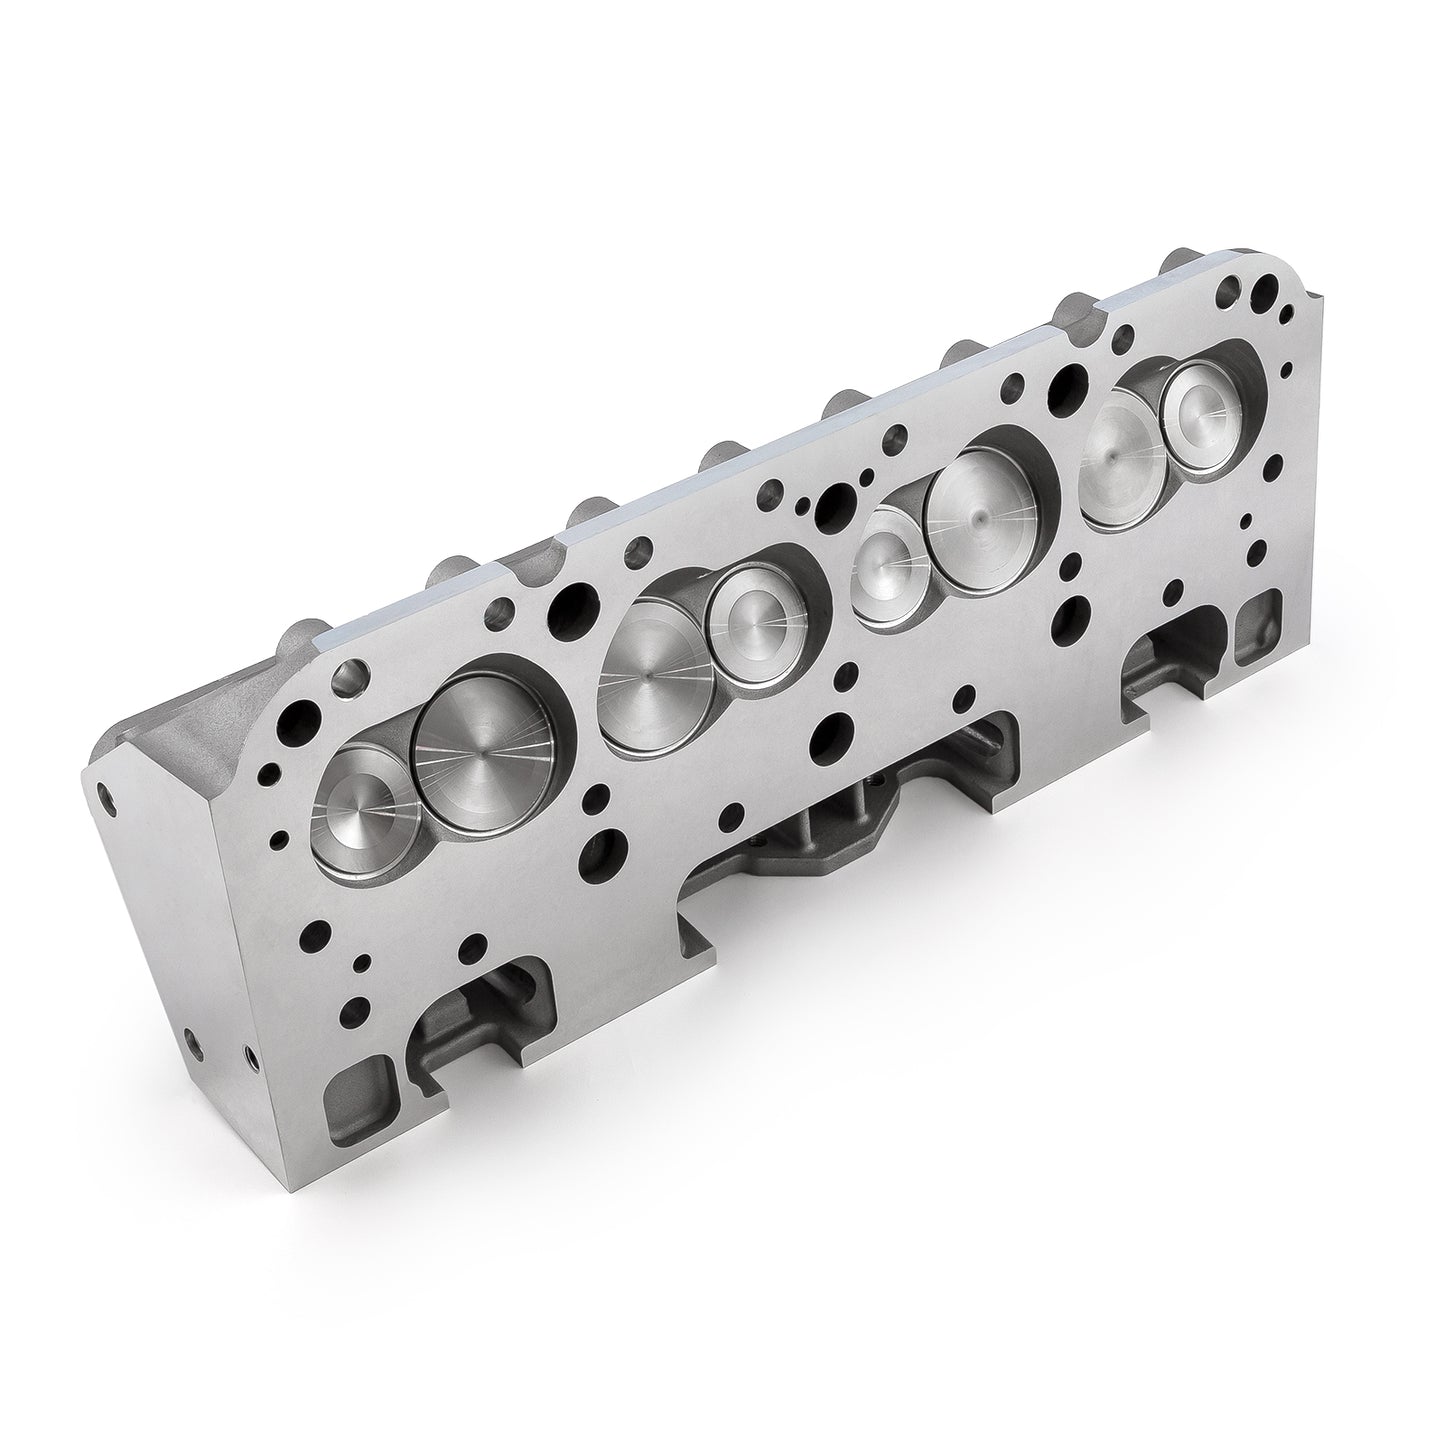 Speedmaster 1-281-001-01 Fits Chevy SBC 350 190cc 64cc Angle Hydraulic FT DNA® Assembled Cylinder Head